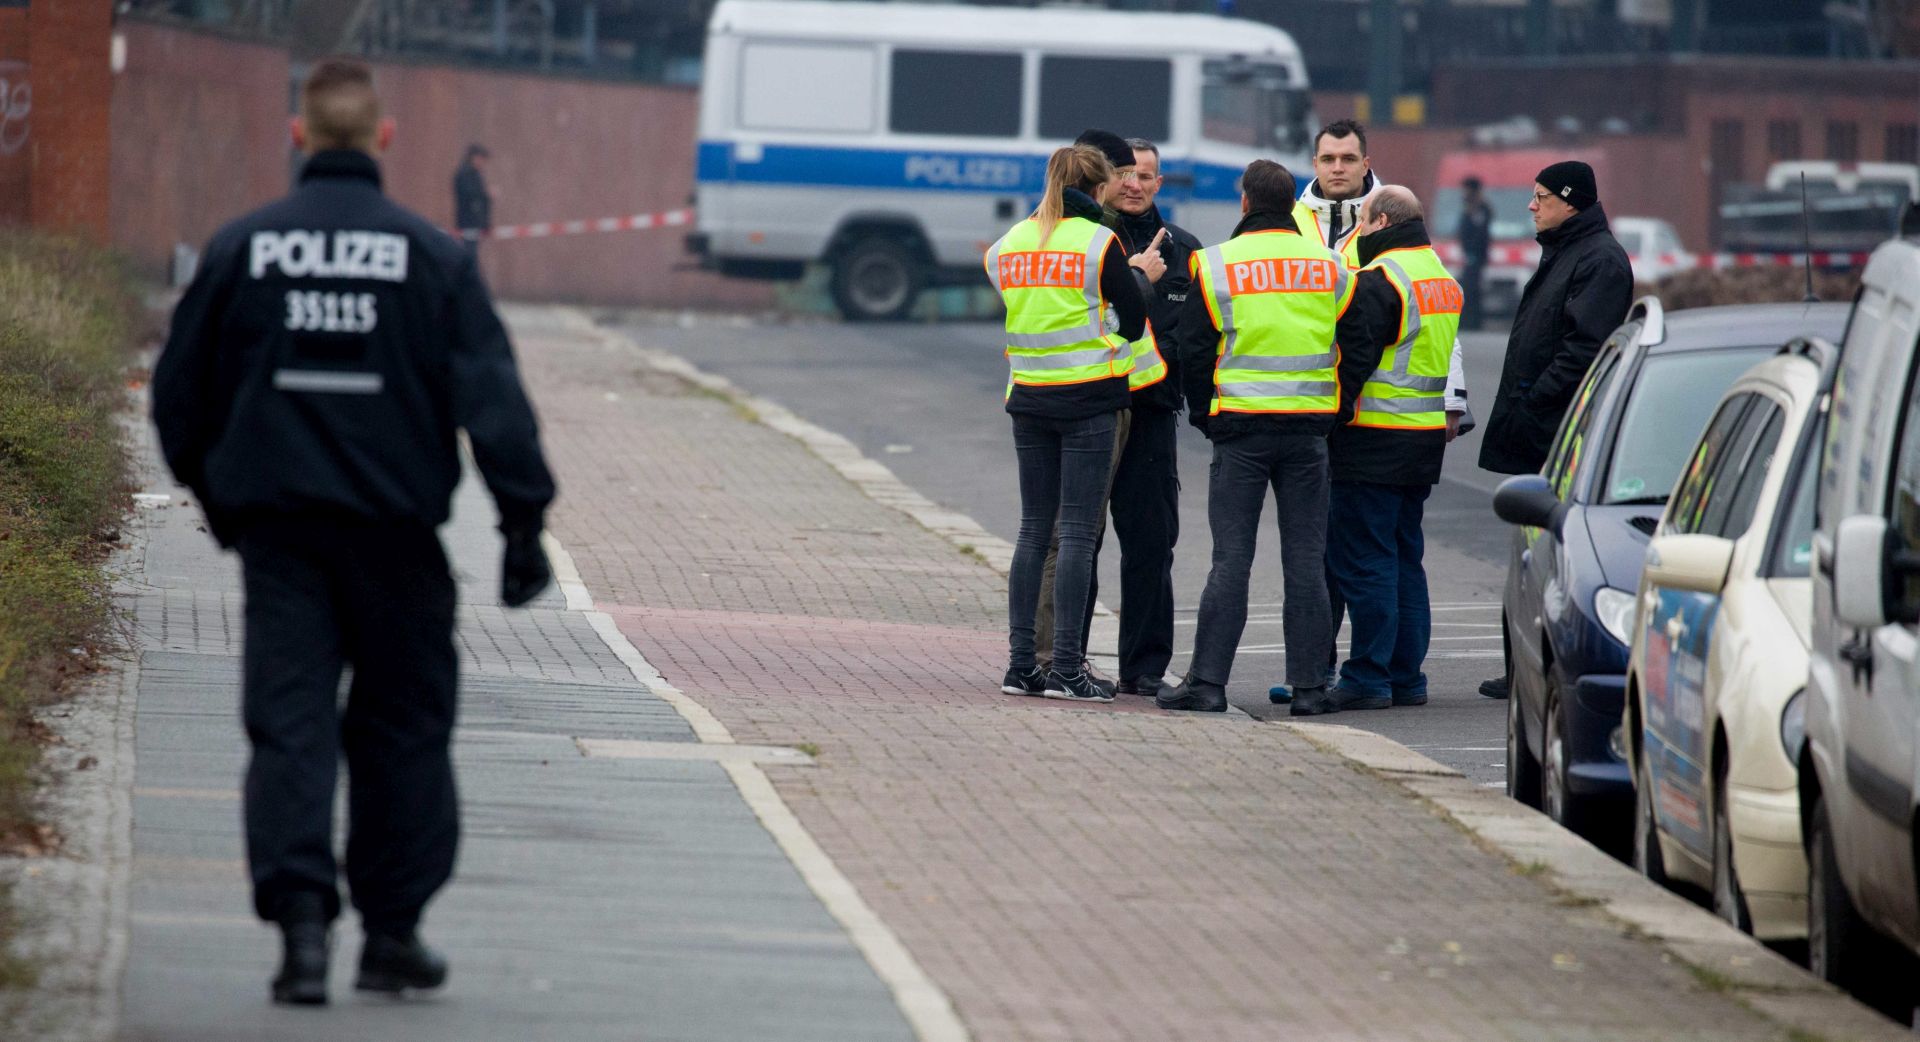 epa05684330 German police officers gather for further investigation at the area in which the truck used in the 19 December Berlin Christmas Market attack is believed to have been parked last, at the Friedrich-Krause-Ufer in an industrial area in the western harbor in Berlin, Germany, 21 December 2016. At least 12 people were killed and around 50 injured in the evening of 19 December 2016, when a truck was driven into a Christmas market, in what authorities said was a deliberate attack.  EPA/KAY NIETFELD